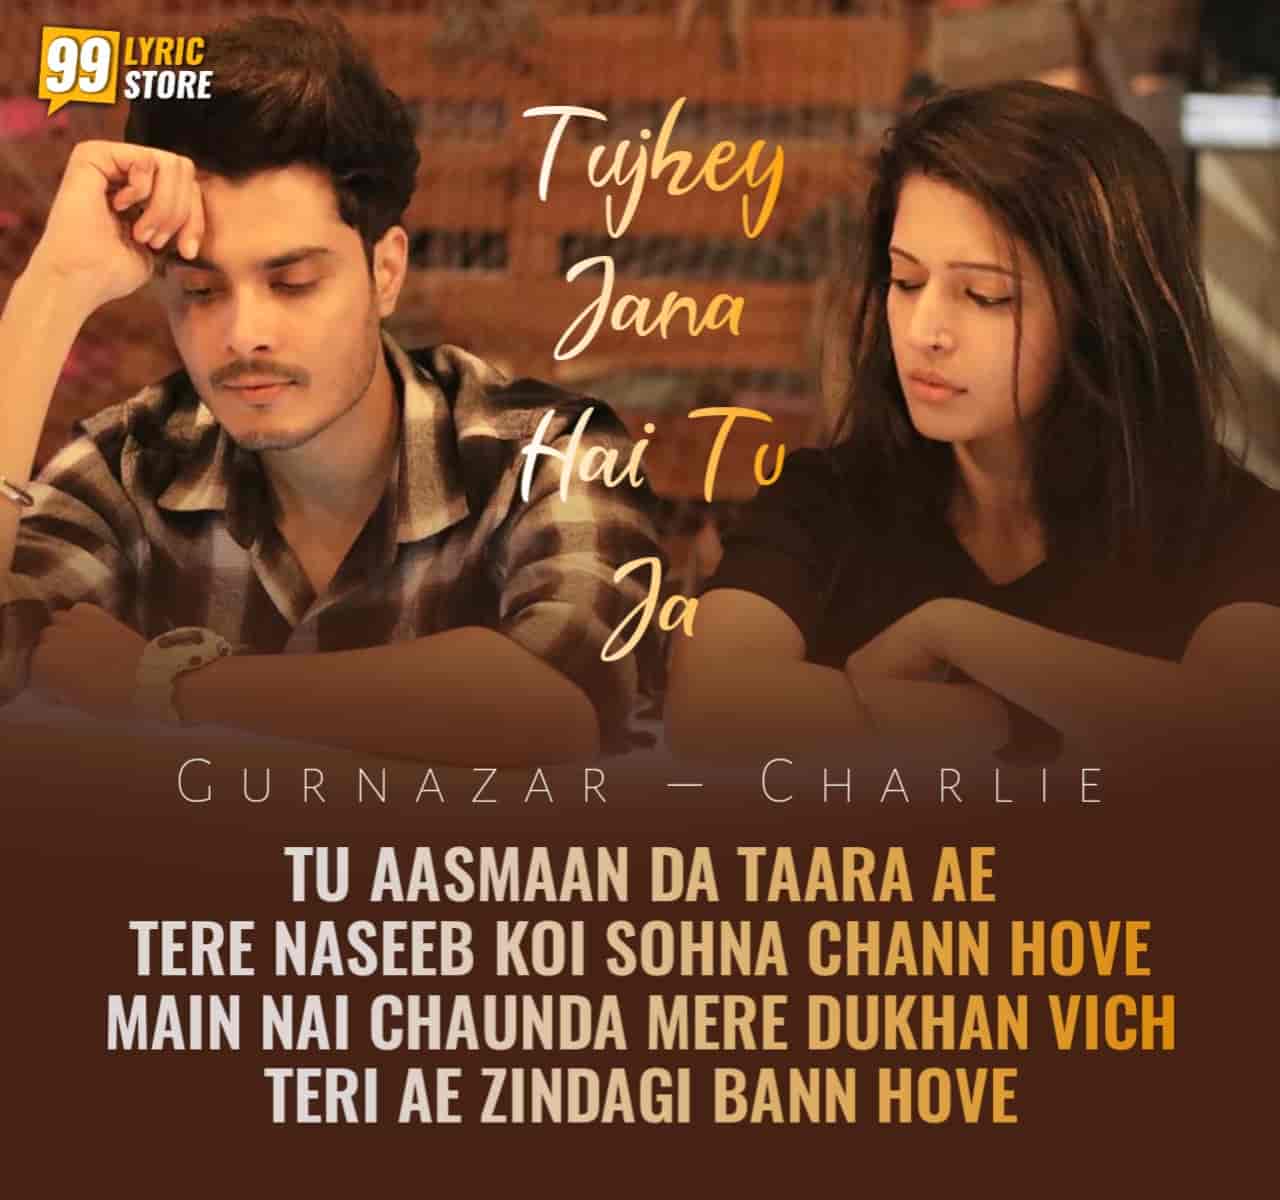 new beautiful shayari which is titled 'Tujhey Jana Hai Tu Ja' has released vocals by them. Charlie and Gurnazar both have penned this shayari lyrics and performed also in this shayari video